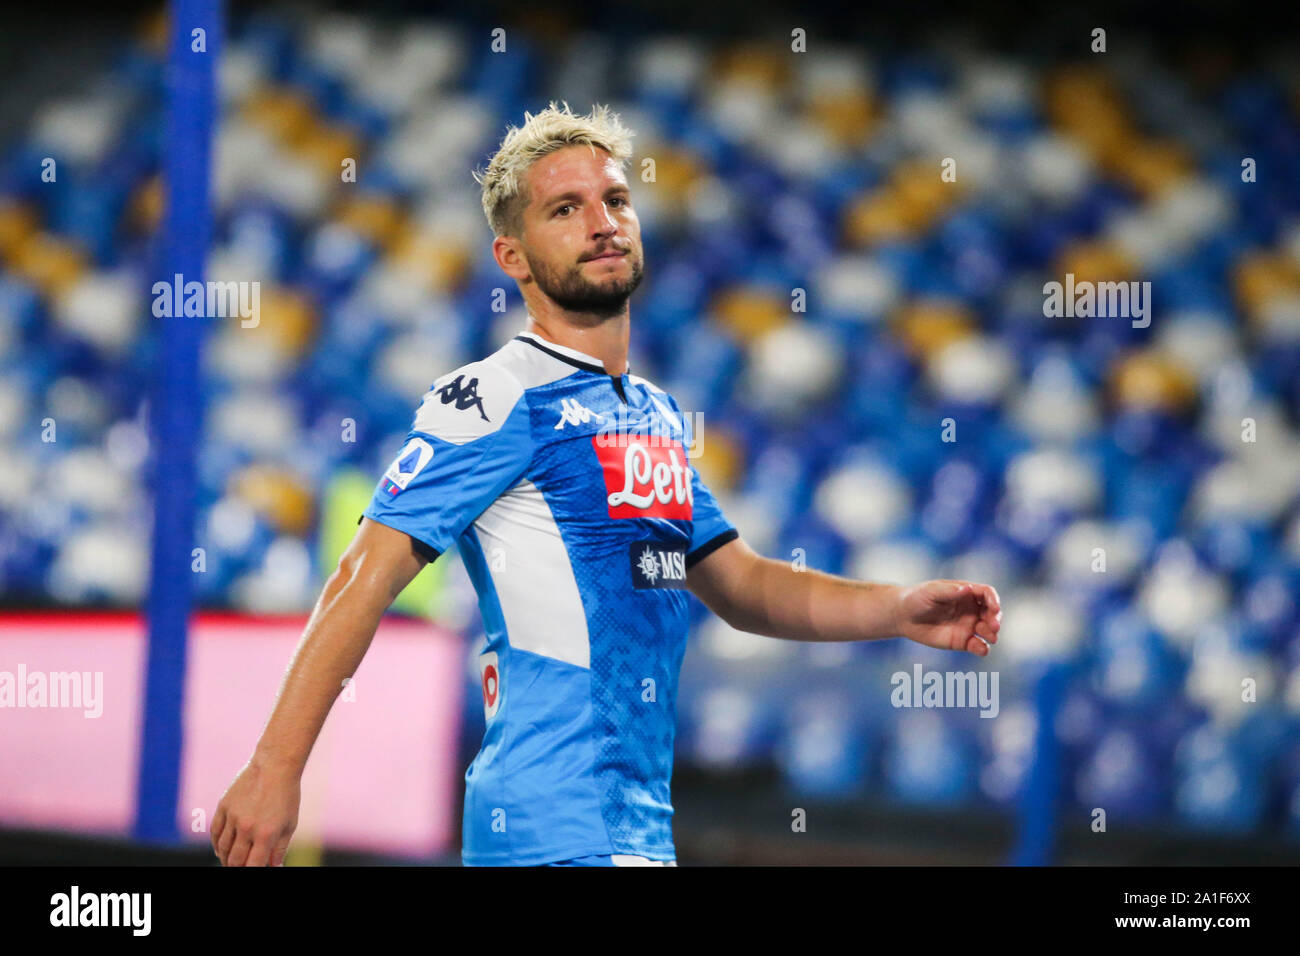 Napoli, Italy. 25th Sep, 2019. Dries Mertens belgium striker ssc napoli during the serie a football match SSC Napoli vs Cagliari Calcio on September 25 2019 at the San Paolo Stadium (Photo by Antonio Balasco/Pacific Press) Credit: Pacific Press Agency/Alamy Live News Stock Photo